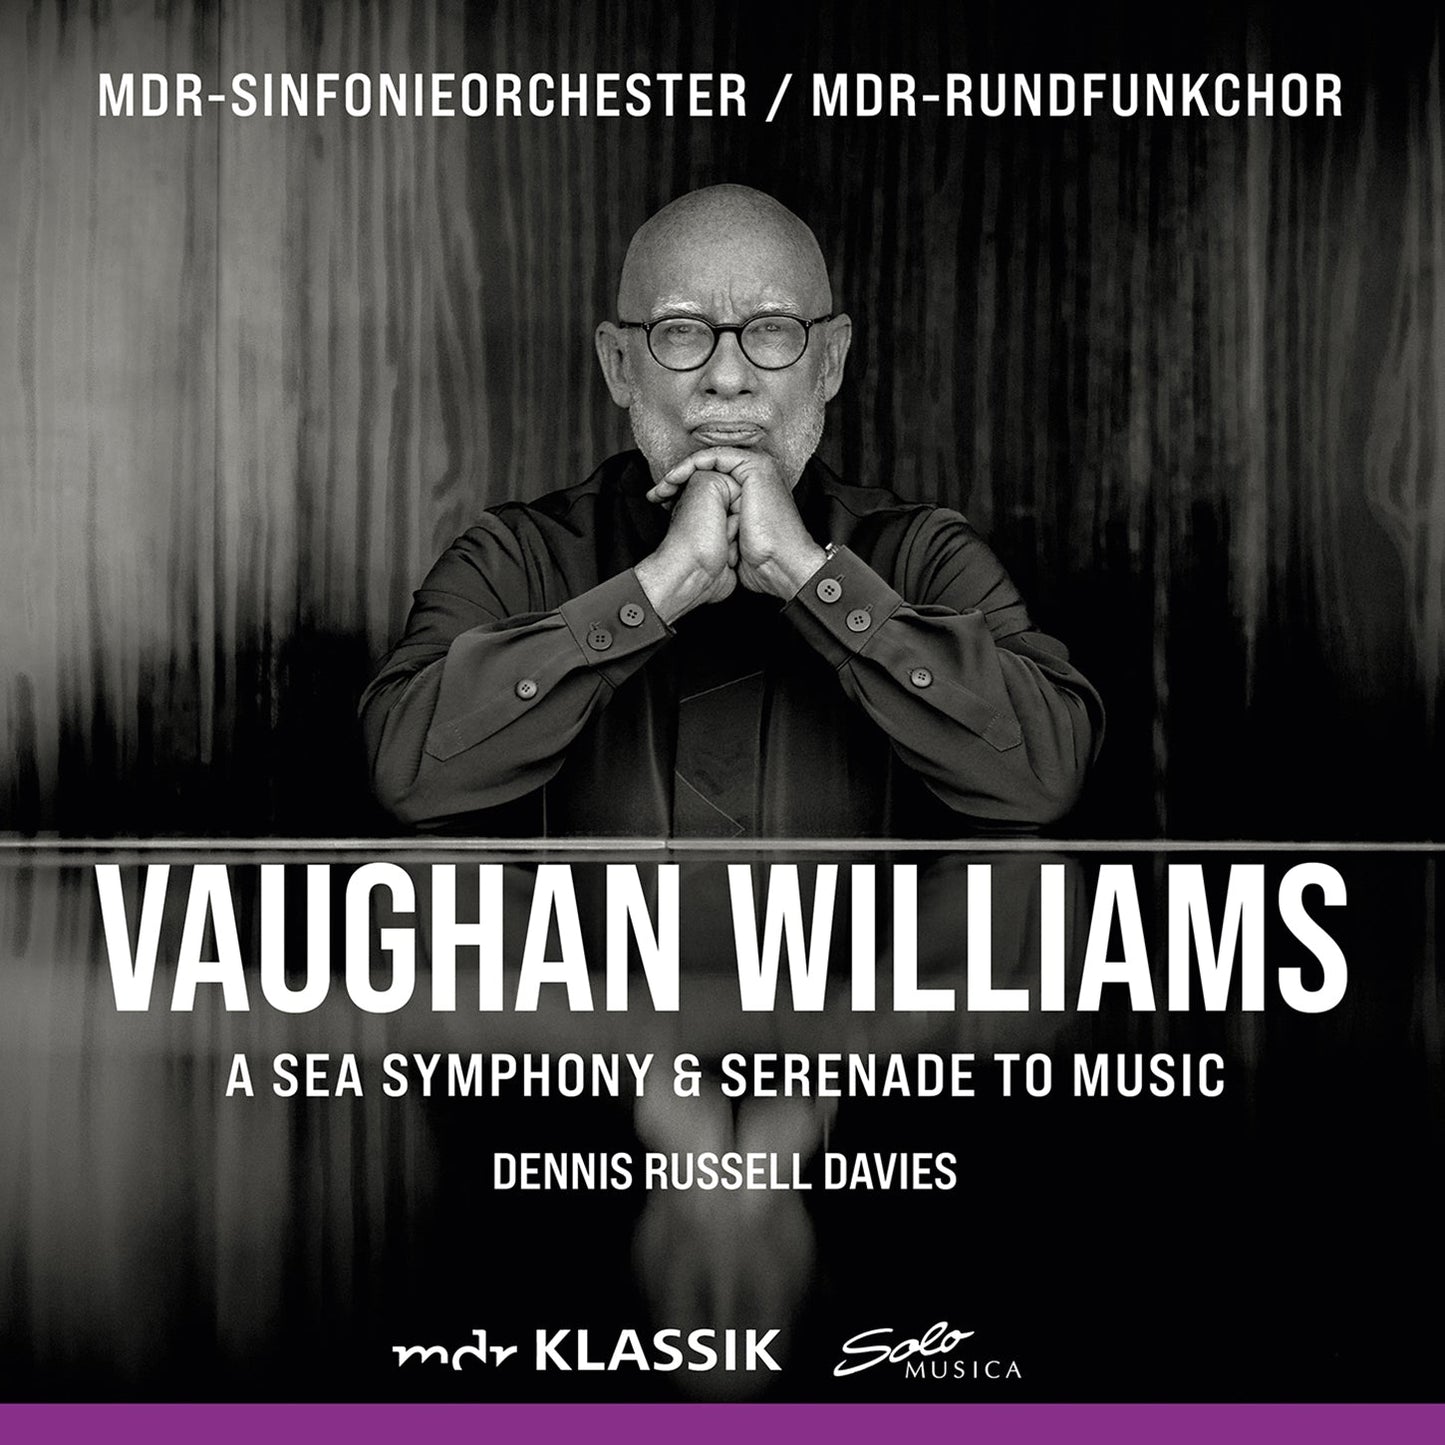 Vaughan Williams: A Sea Symphony & Serenade To Music